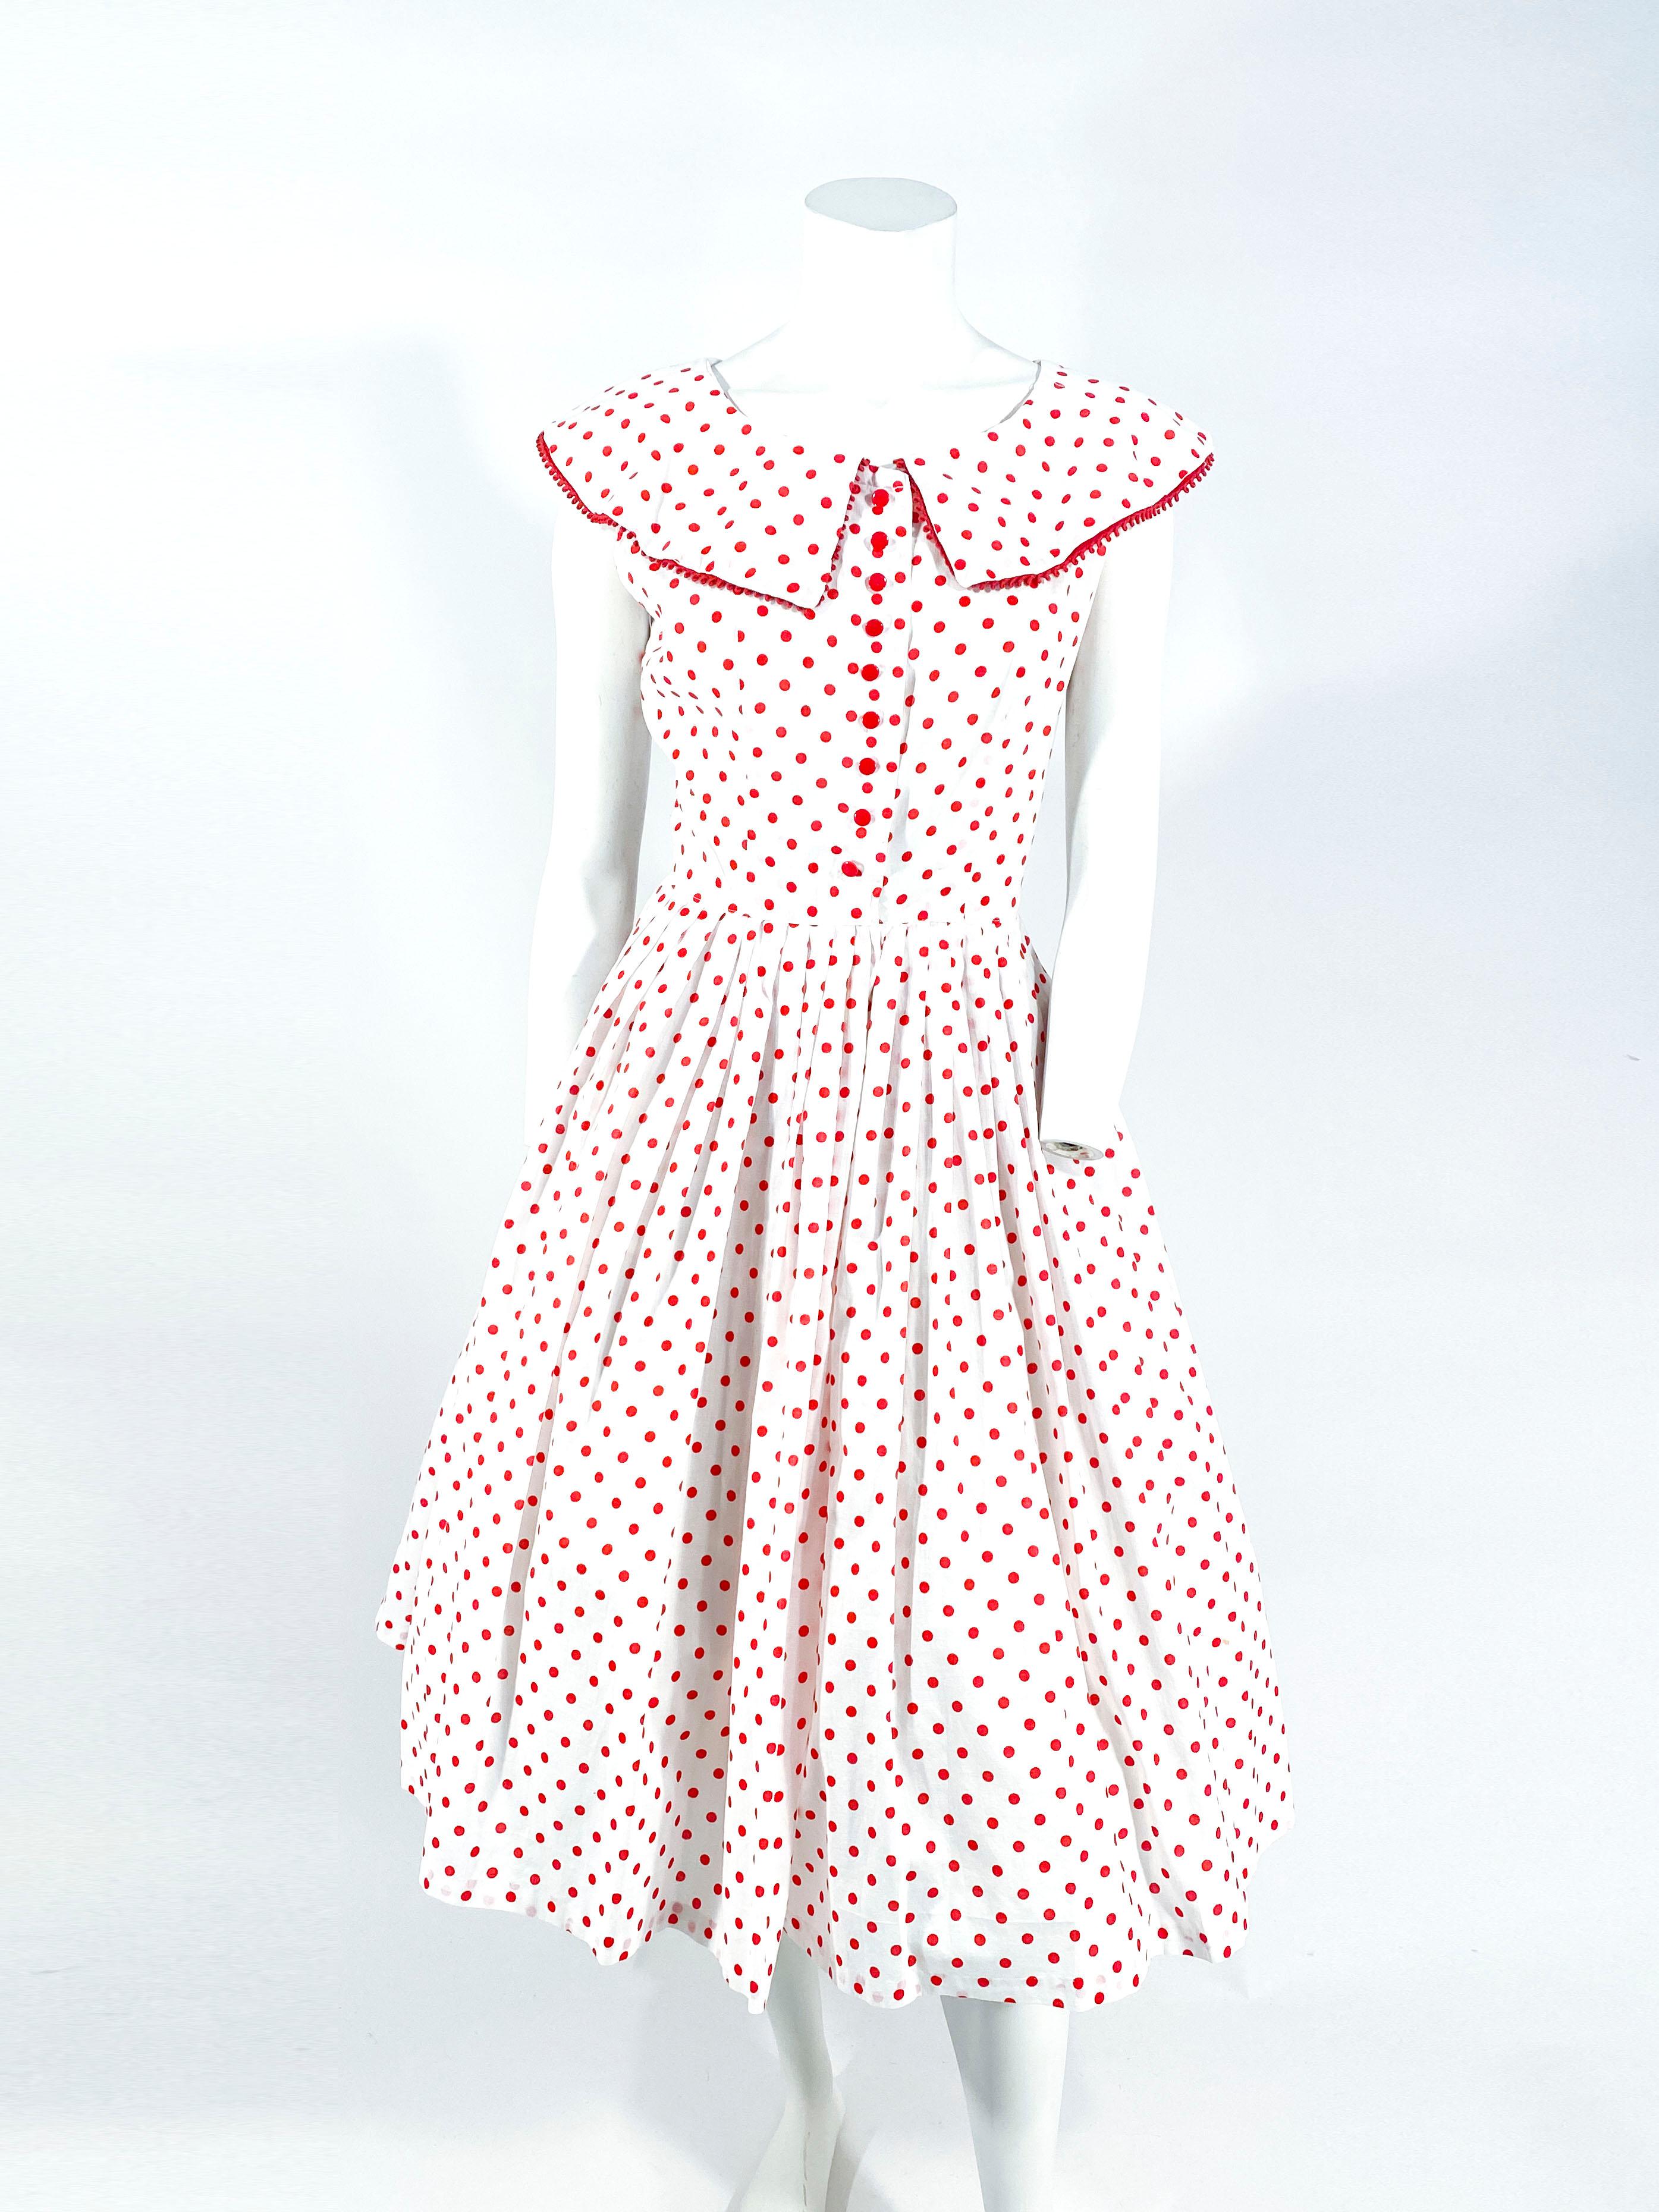 1950s white cotton day dress featuring a red polka dot print, puritan collar, bric-a-brac trim, front button closure, plastic buttons, and a matching plastic belt with cut-outs. The skirt is very full and has several knife pleats along the waist